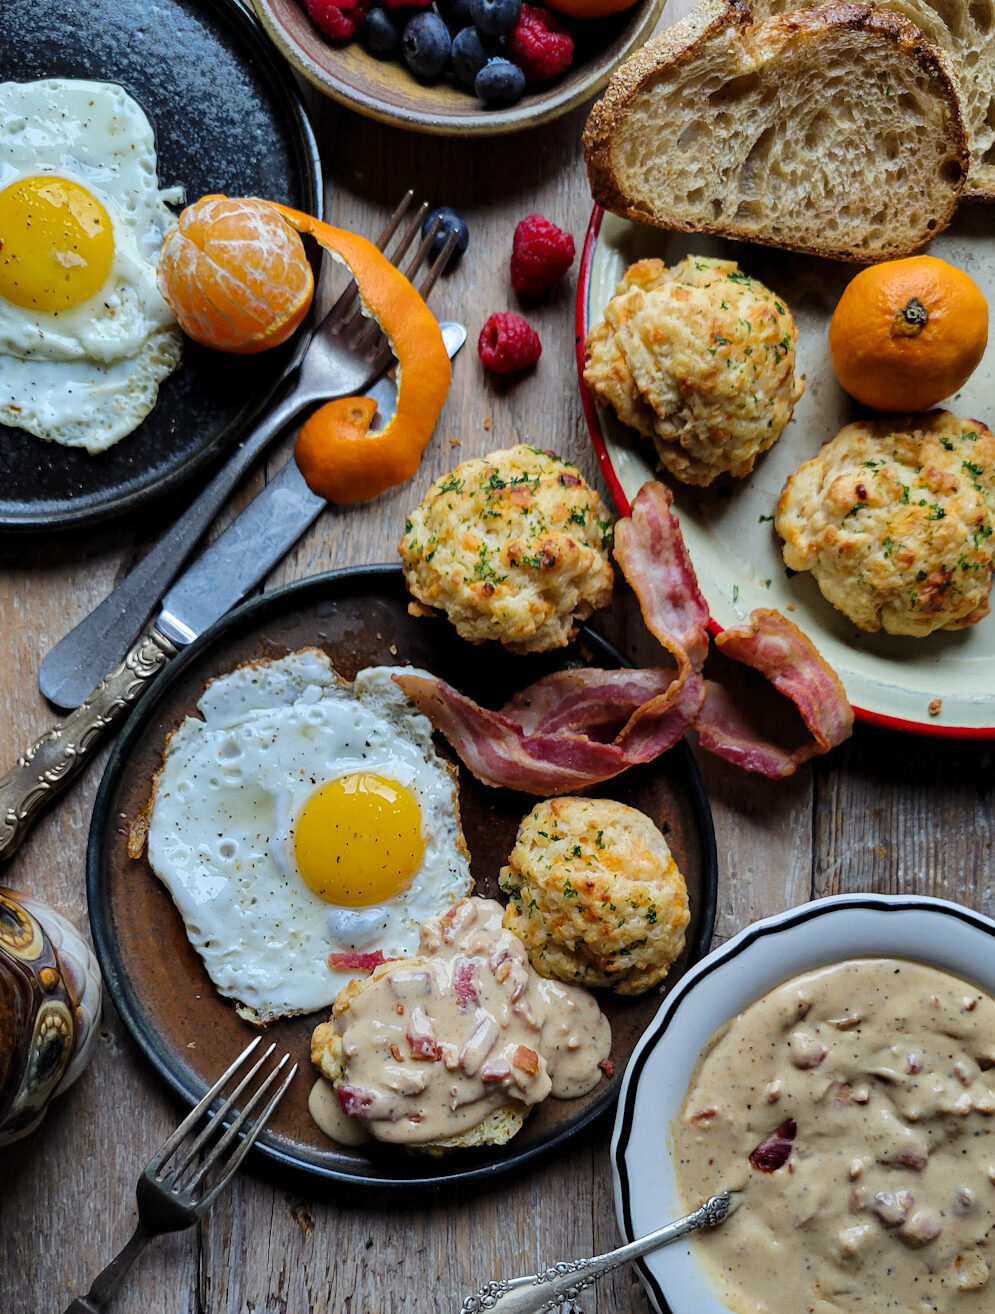 A breakfast plate filled with a sunny side up egg, bacon and an Easy Cheddar Drop Biscuit smothered in Bacon Gravy.